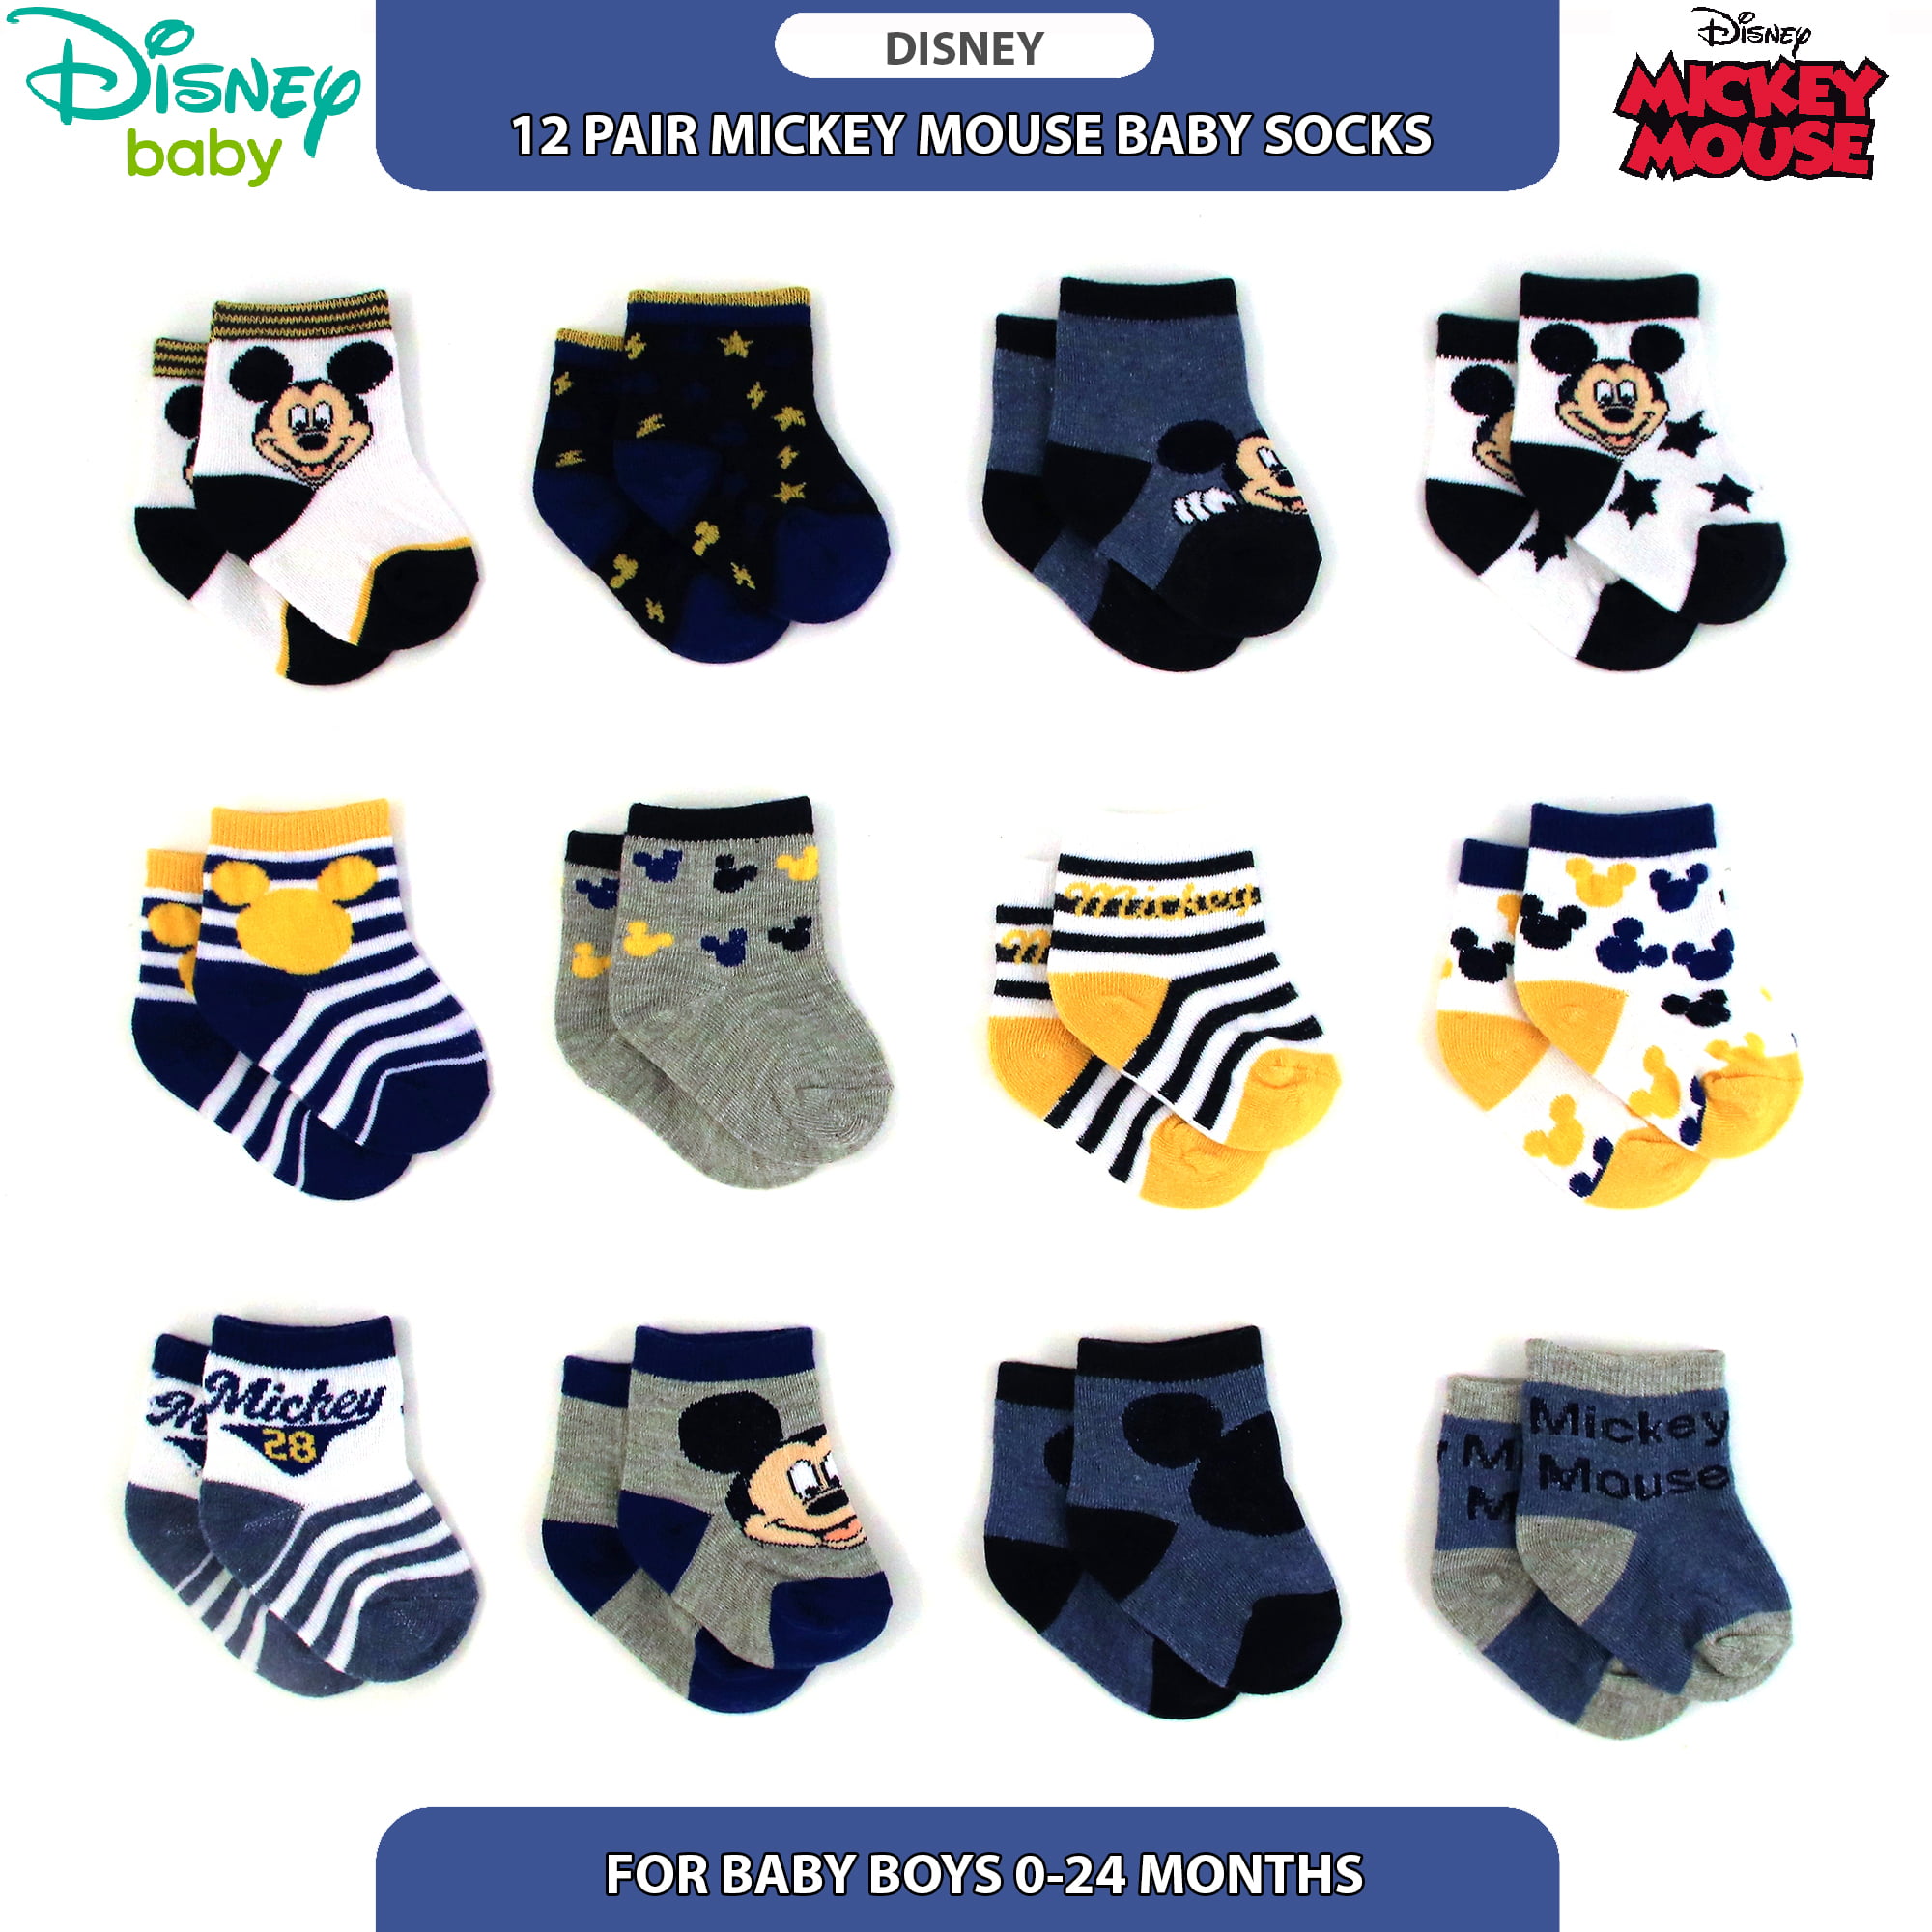 Newborn/Infant Disney Baby Boys Mickey Mouse Character Designs Socks 12 Pack 